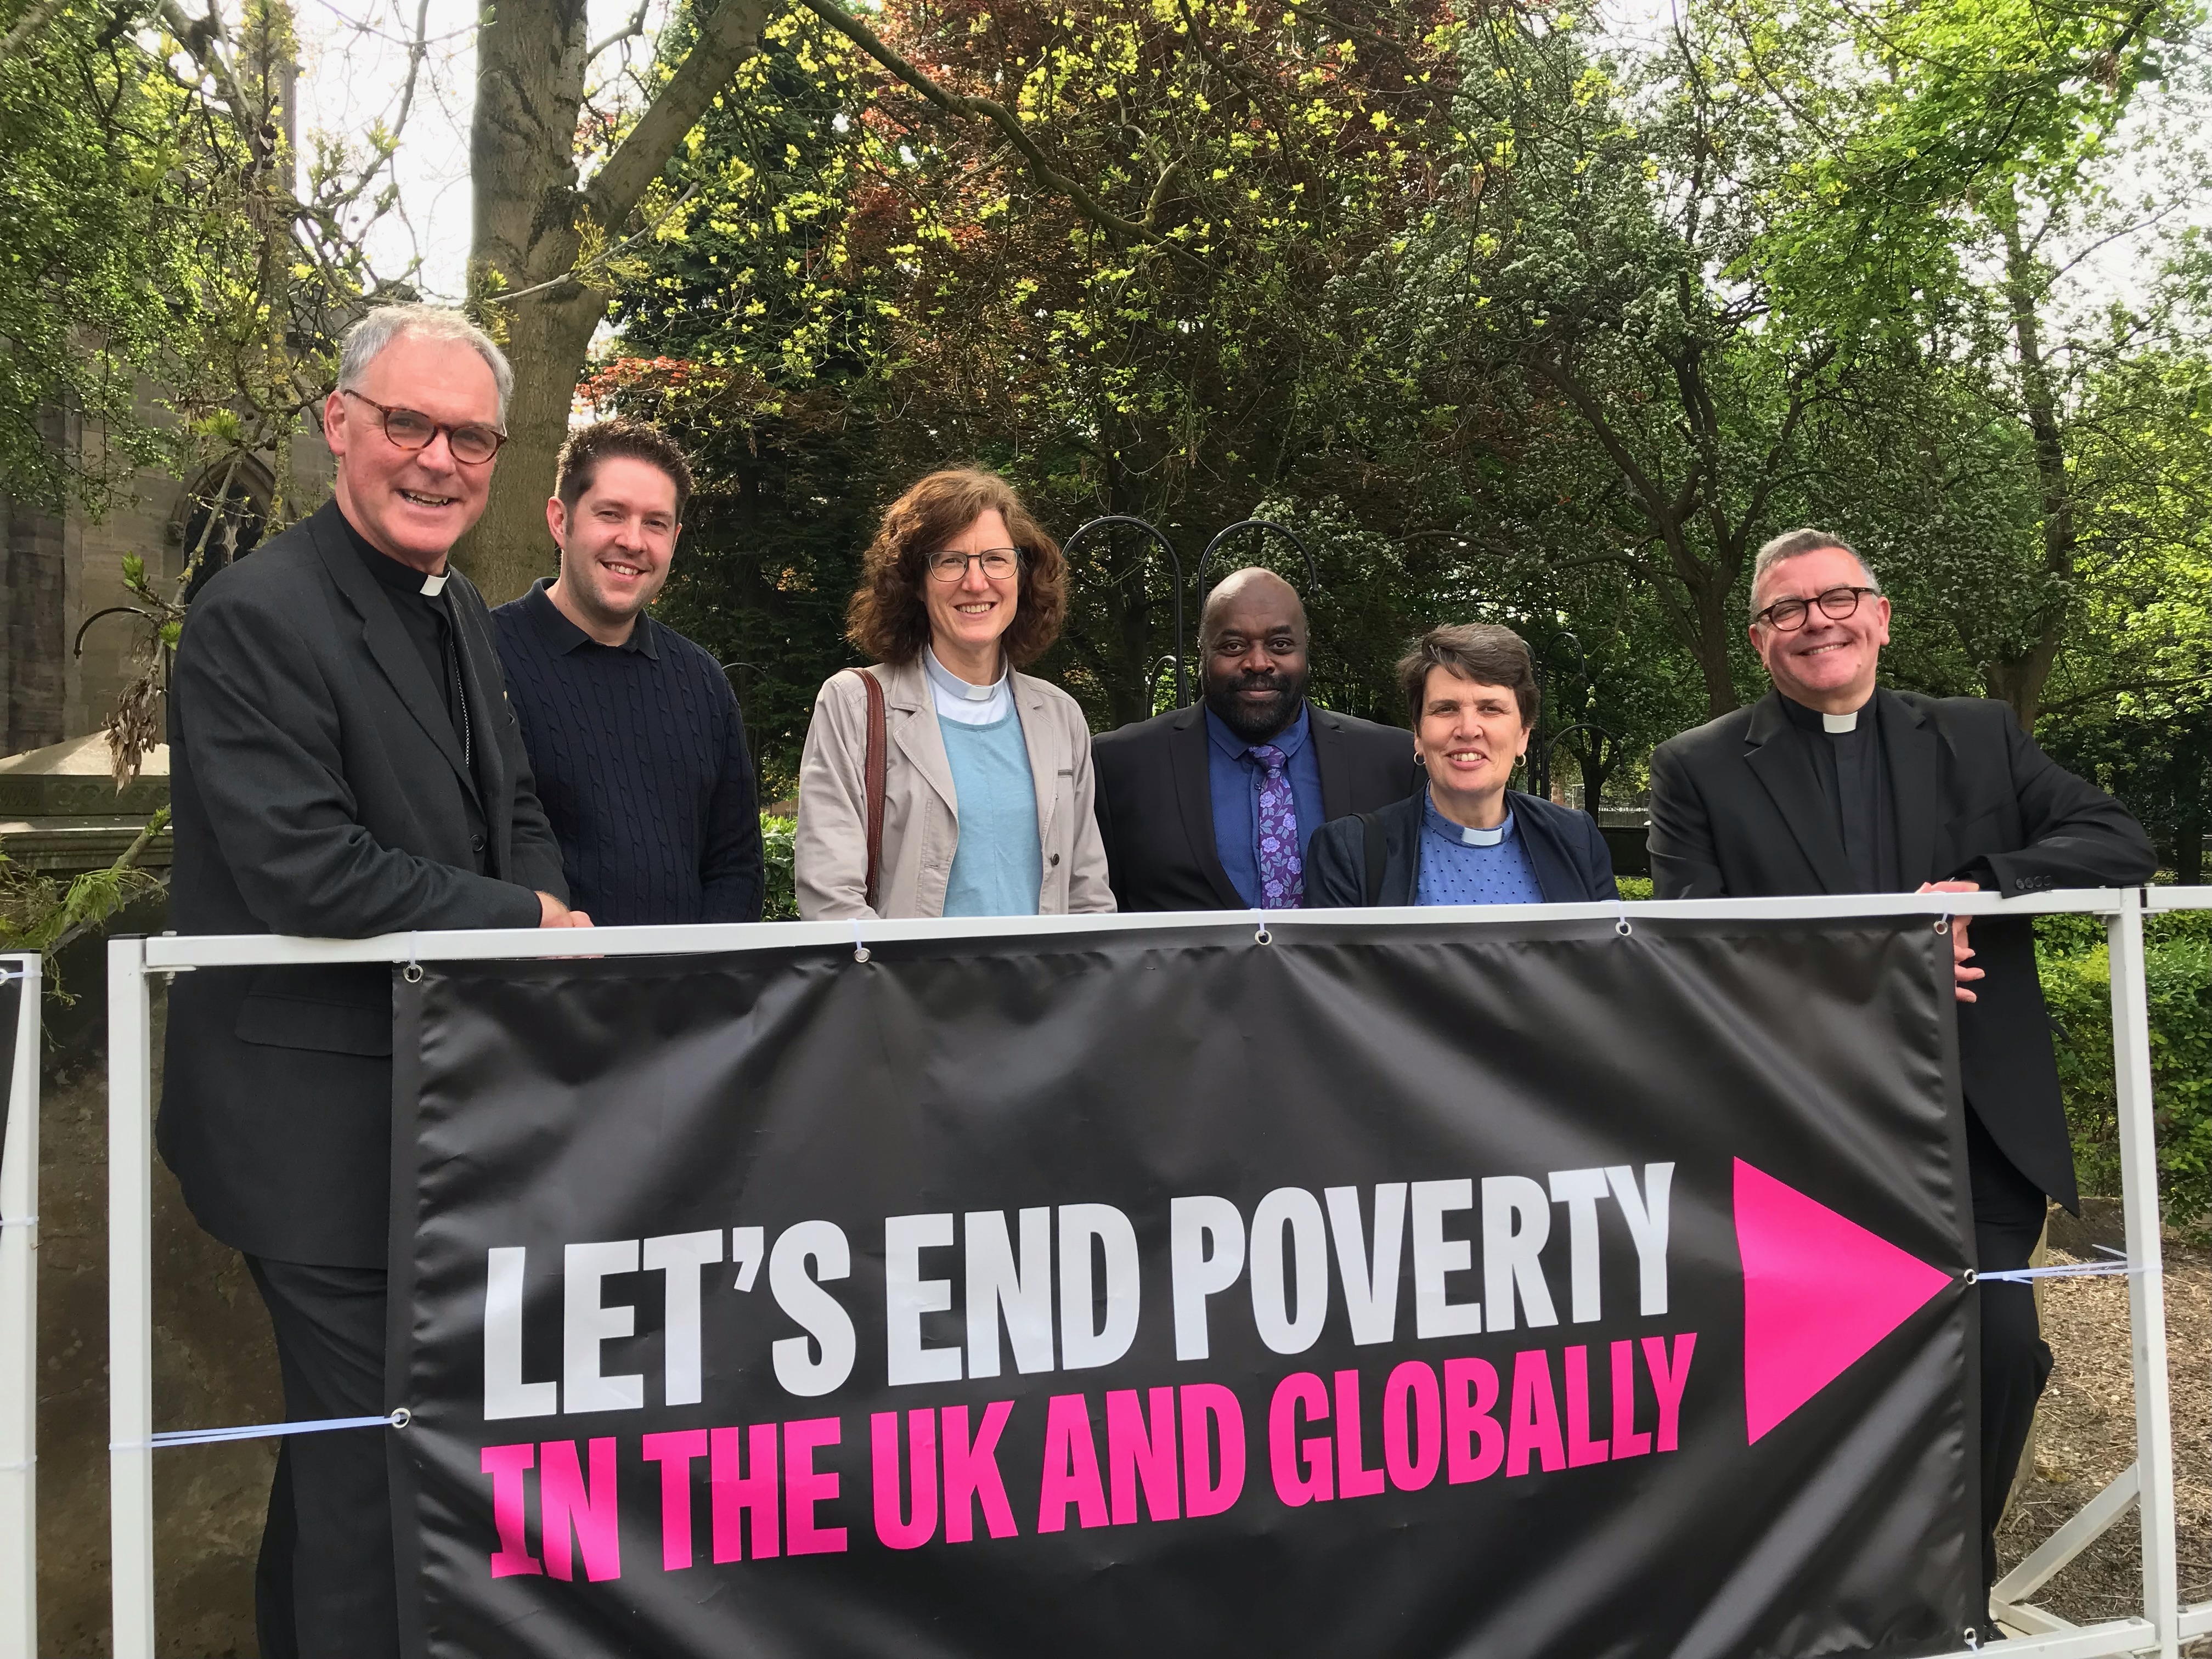 L-R Matthew Parker, Bishop of Stoke, Paul Adams, Church Warden of Stoke Minster, Megan Smith, Archdeacon of Stoke, Helen Dent, Chair of Chester and Stoke Methodist District, Dave Ellis, Baptist Regional Minister for Stoke and Paul McNally, Episcopal Vicar for Staffordshire and the Black Country, Archdiocese of Birmingham